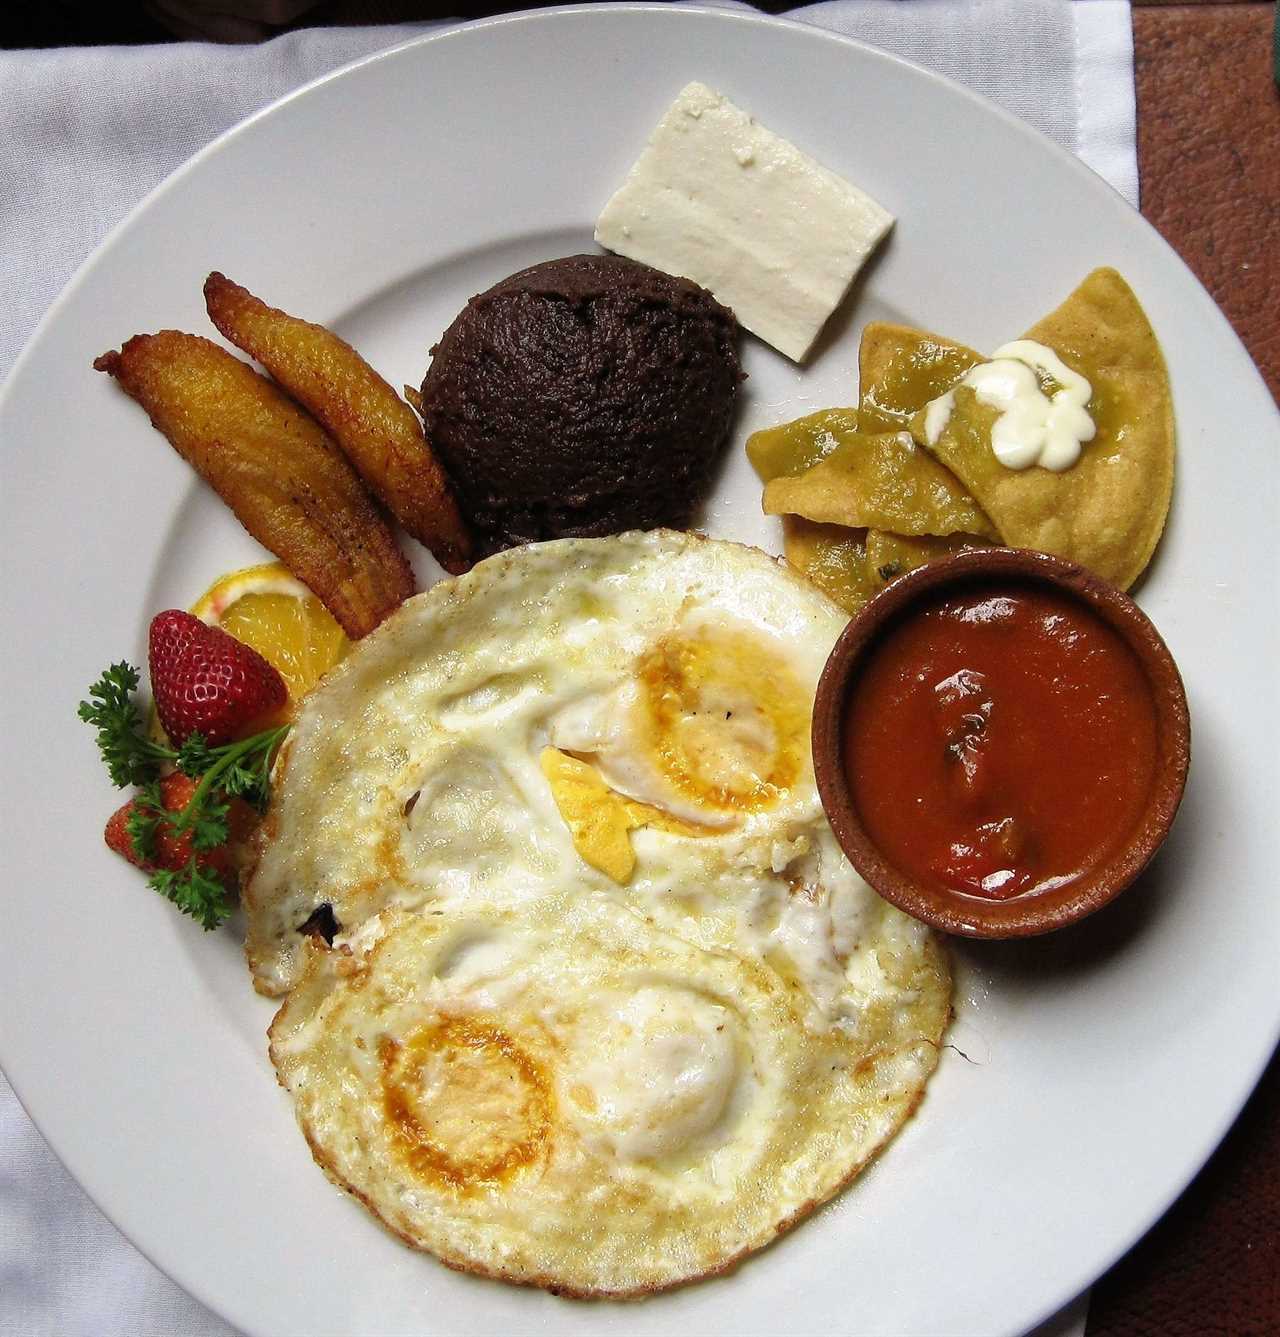 desayuno tipico served at local eatery in guatemala